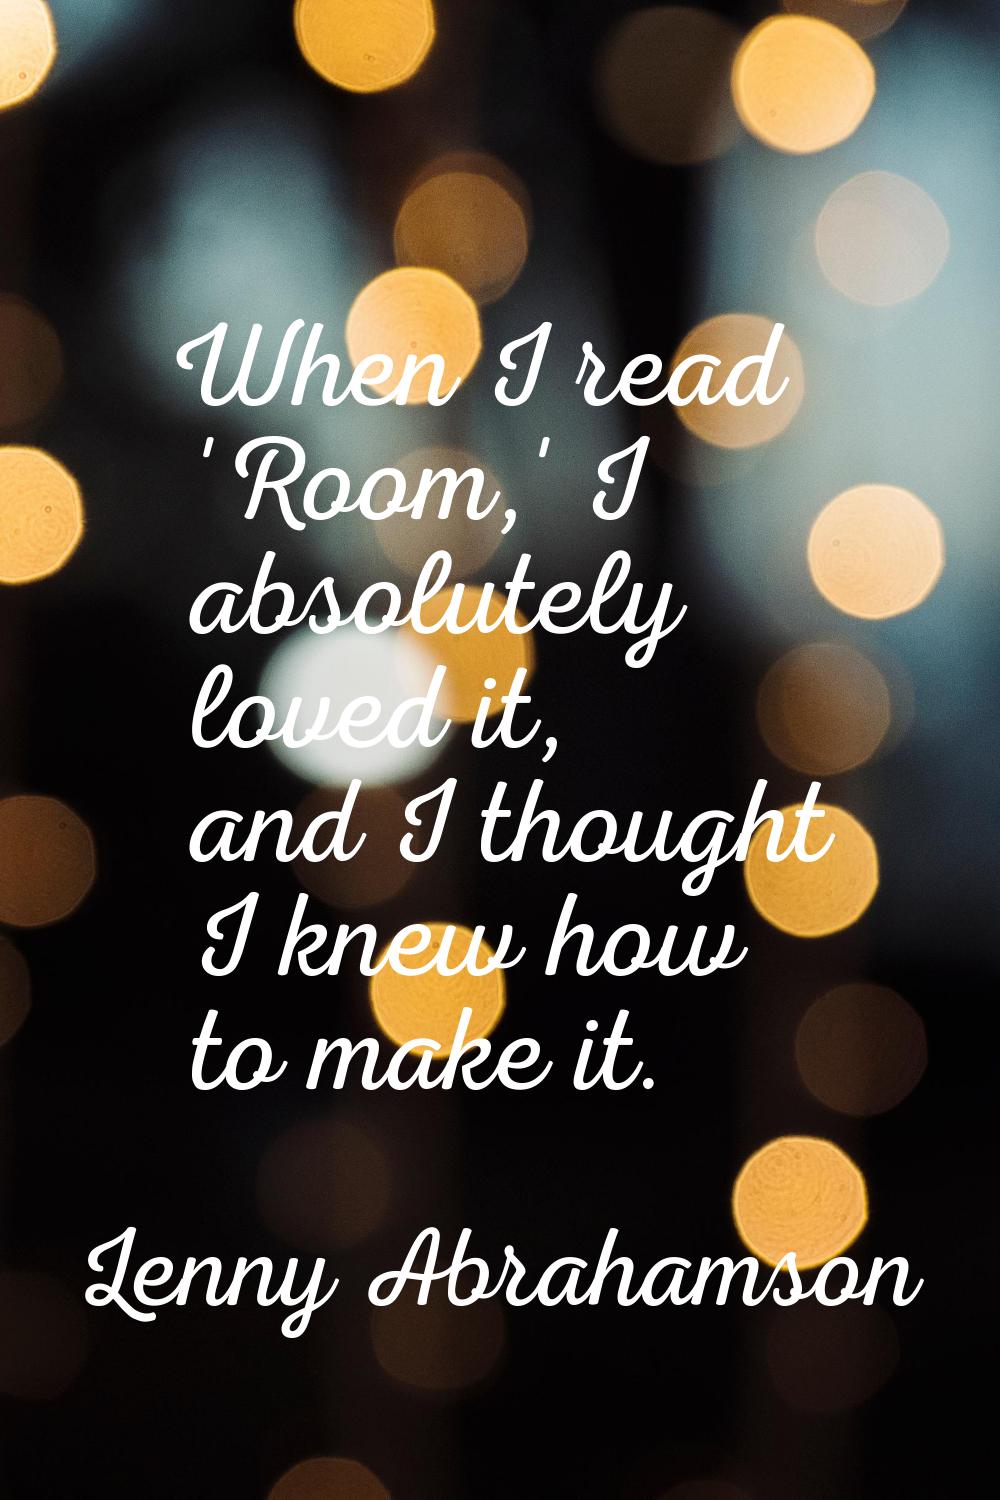 When I read 'Room,' I absolutely loved it, and I thought I knew how to make it.